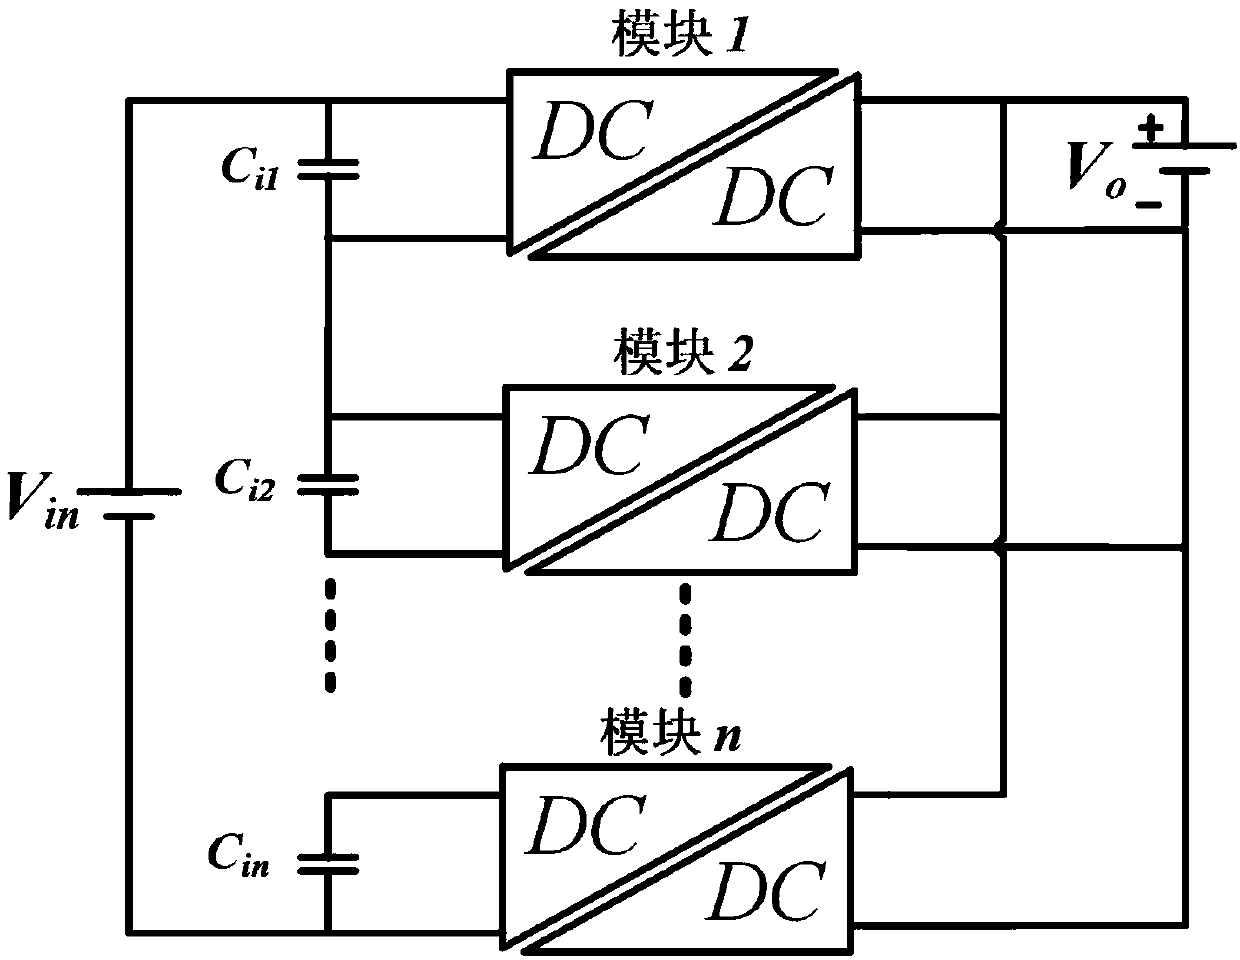 Novel DC power electronic transformer topology having automatic fault removal capability